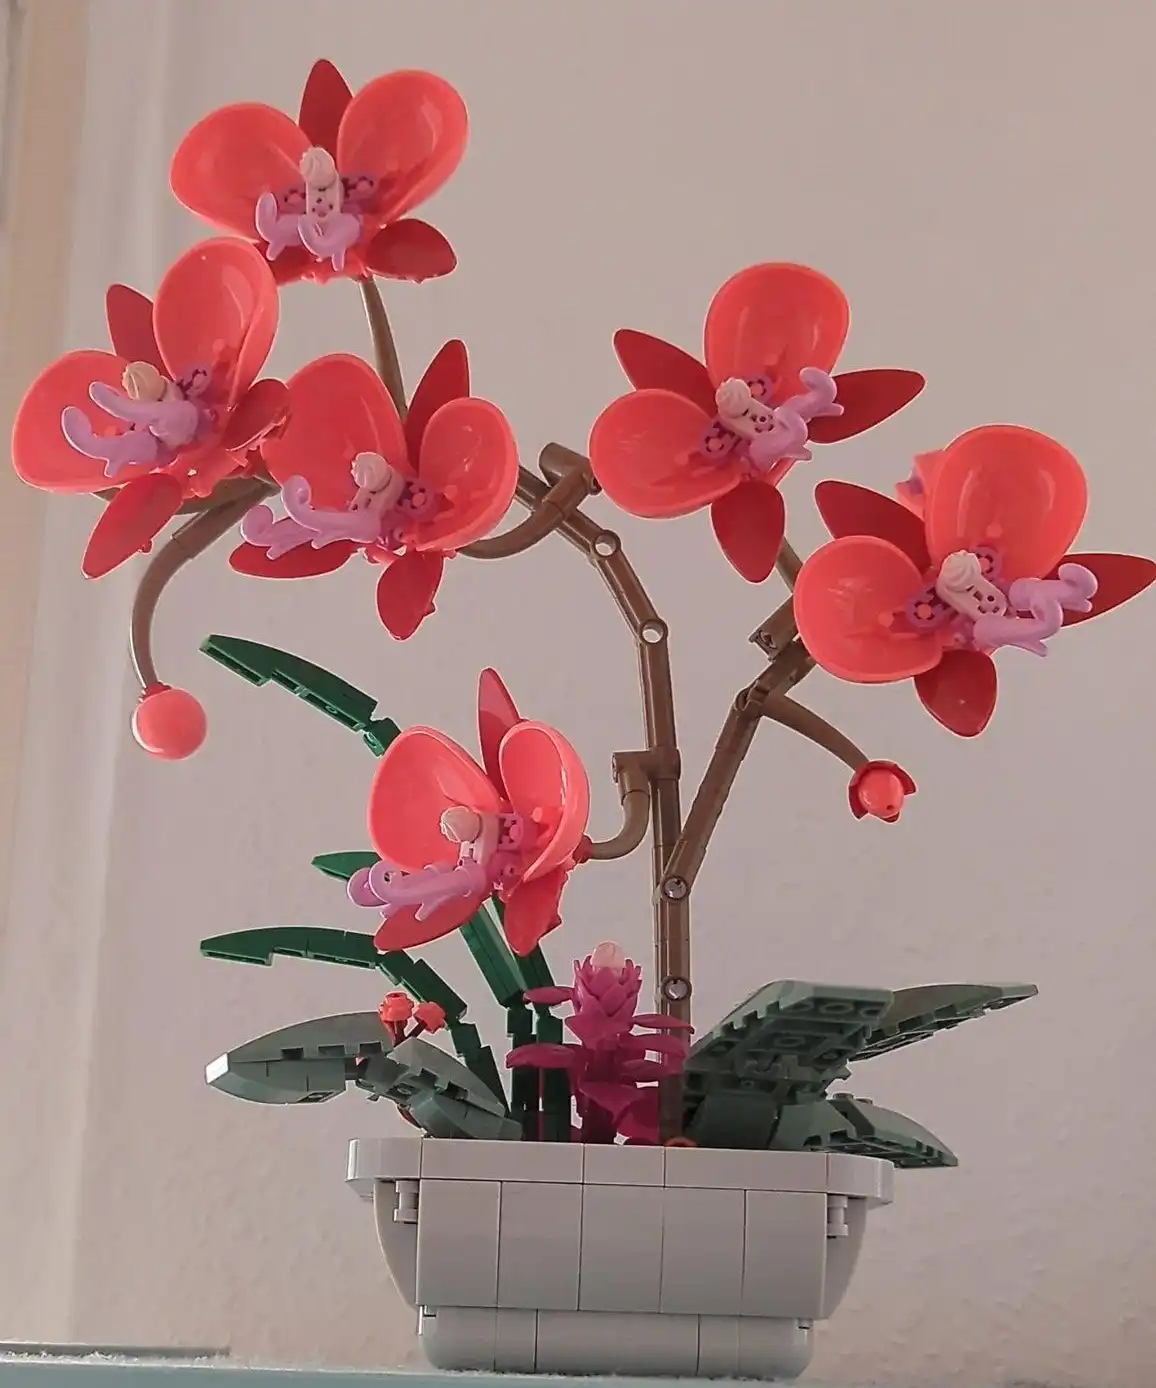 Red phalaenopsis orchids in a grey pot, all made from studded bricks